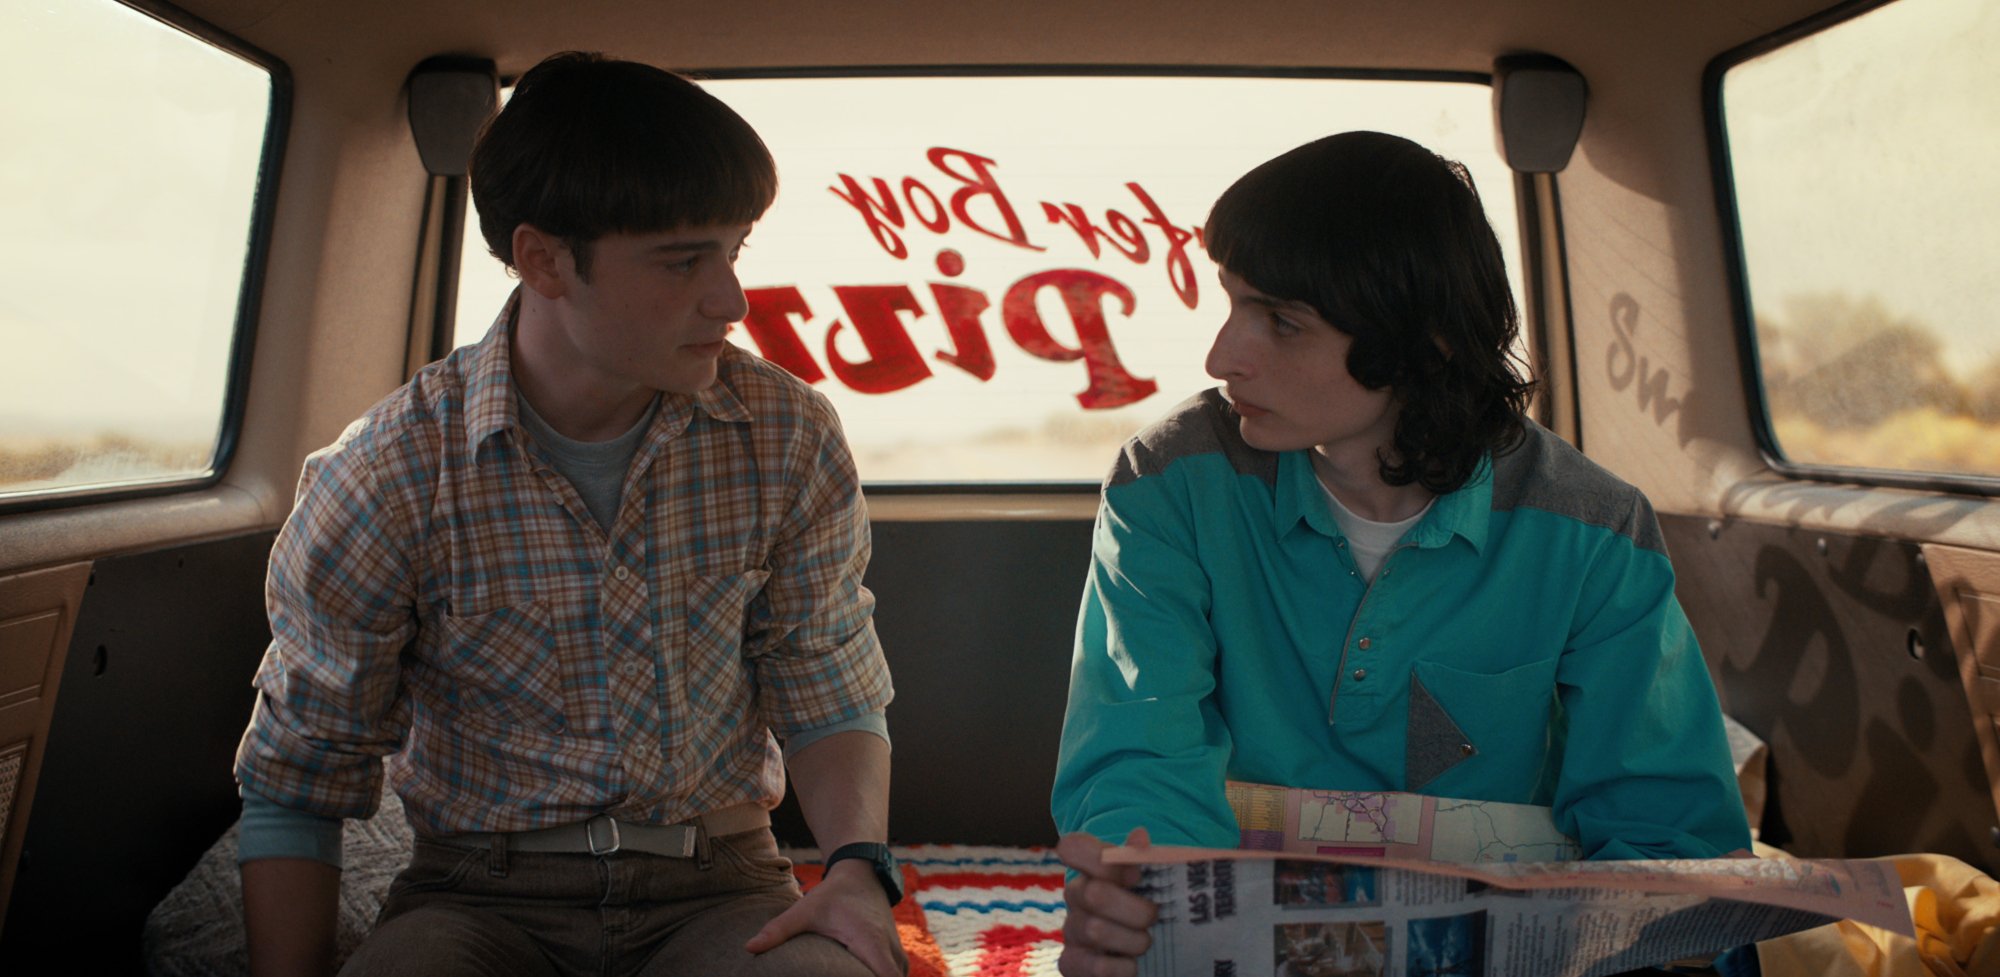 Noah Schnapp as Will Byers in 'Stranger Things' 4 with Mike Wheeler.